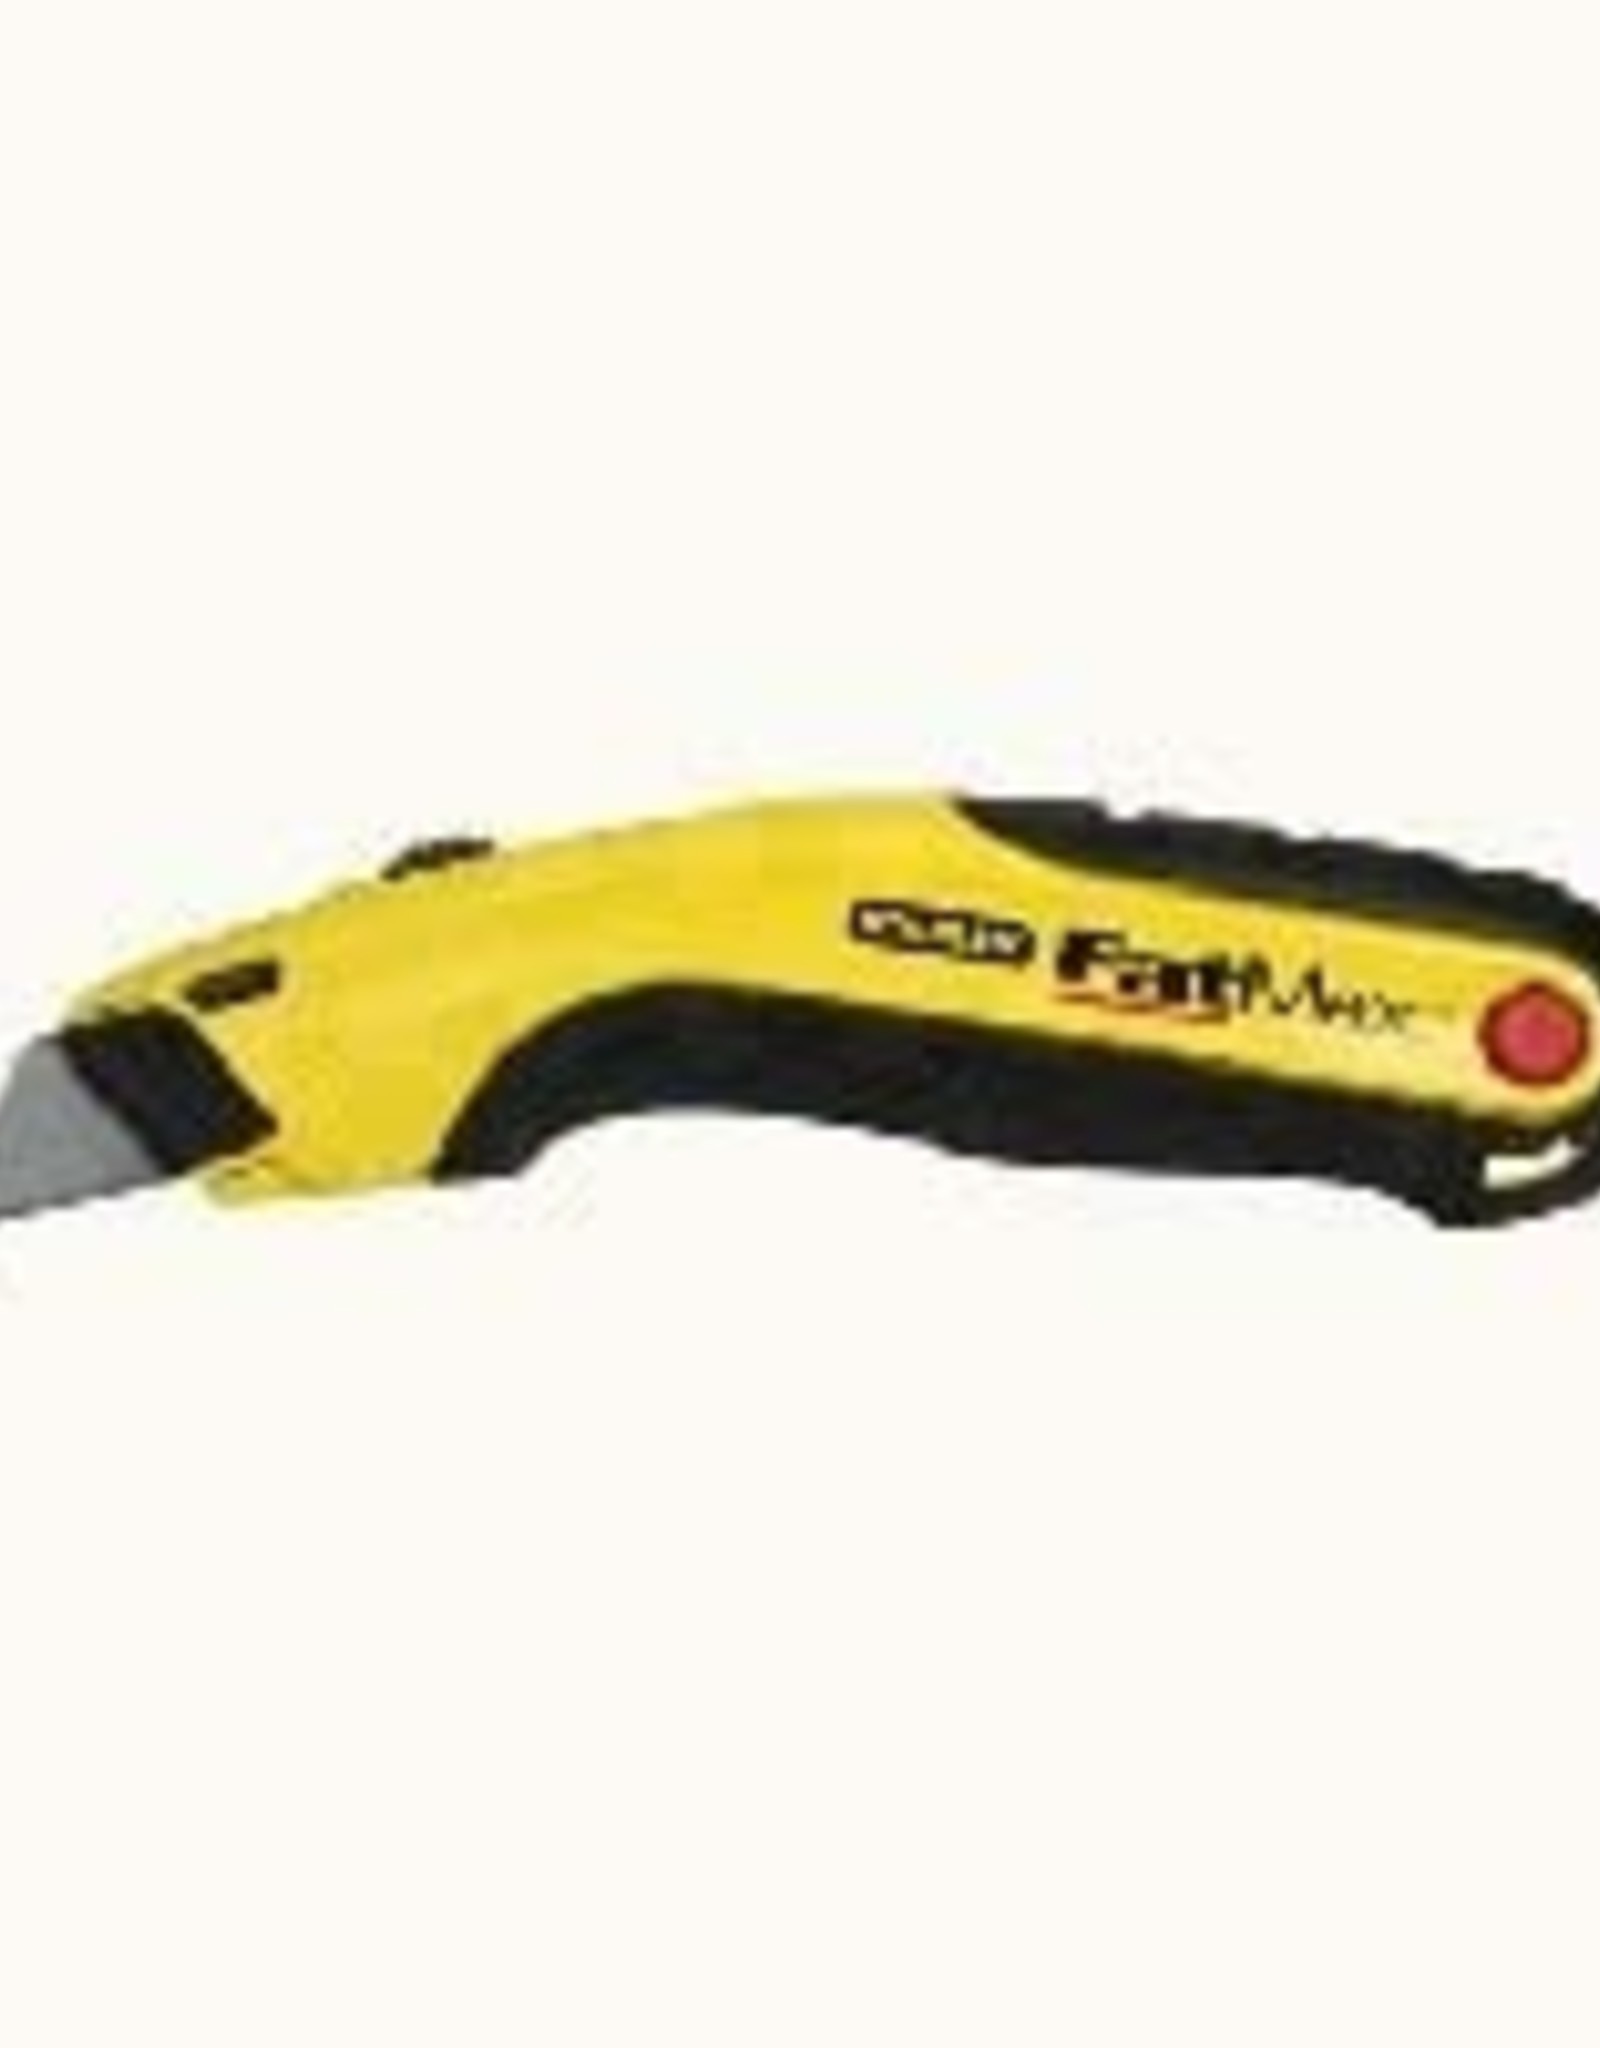 Stanley Tools Stanley - Fatmax Retractable Utility Knife